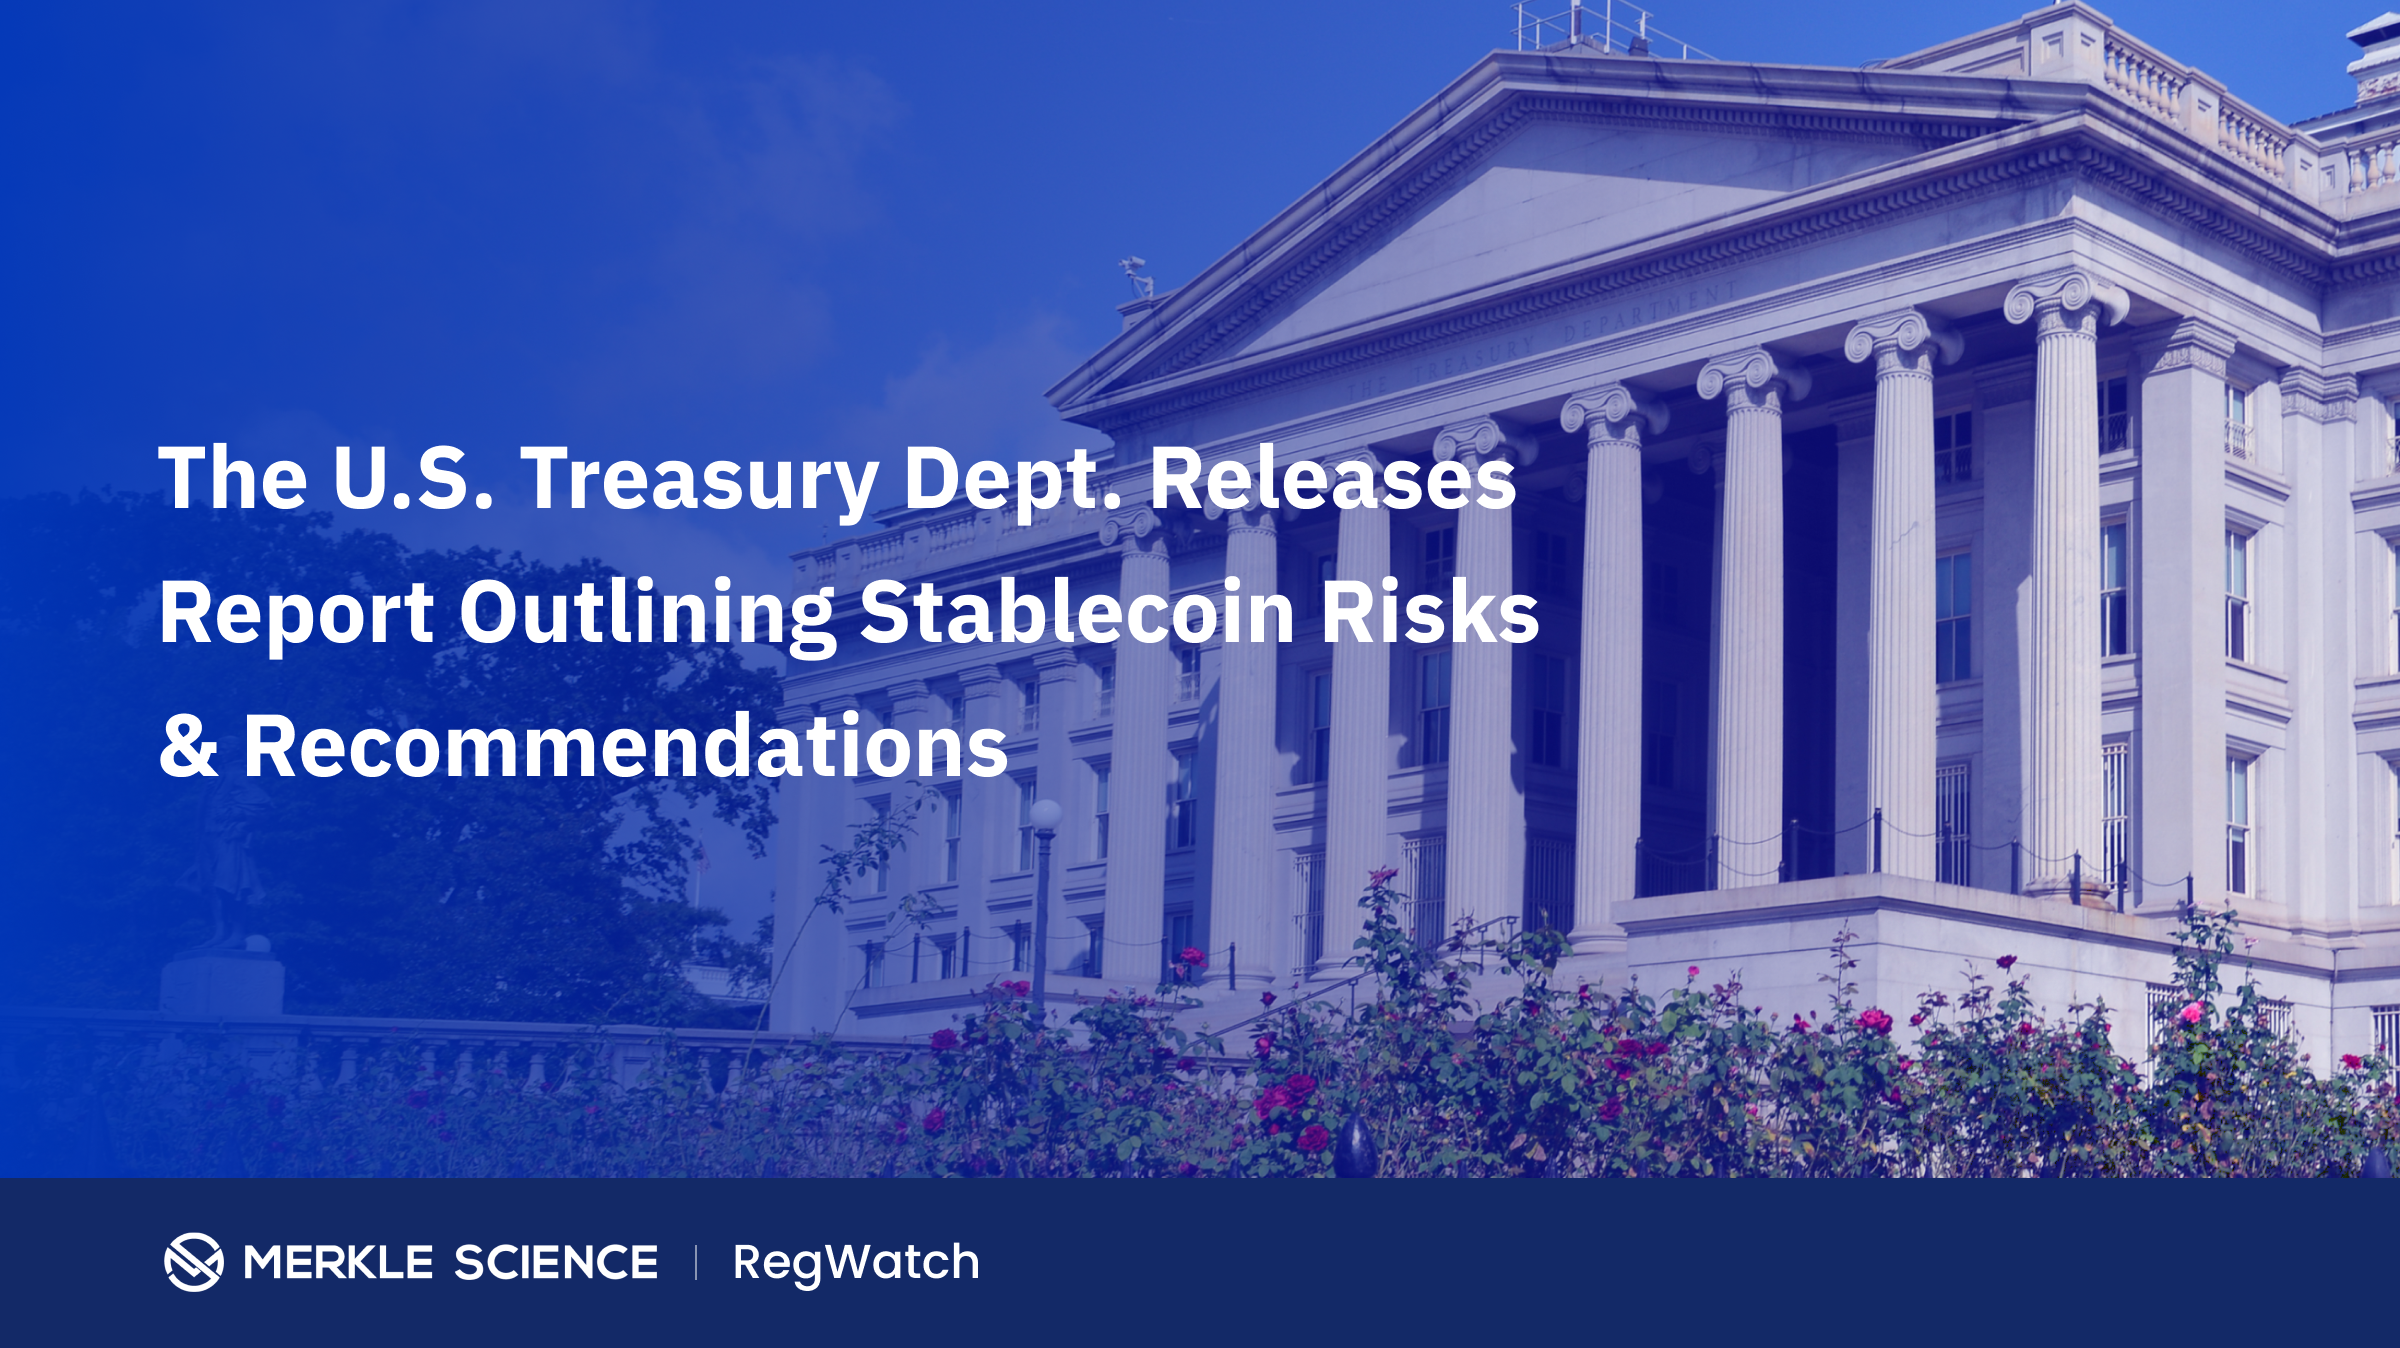 The U.S. Treasury Department Releases Highly-Anticipated Report on Stablecoins